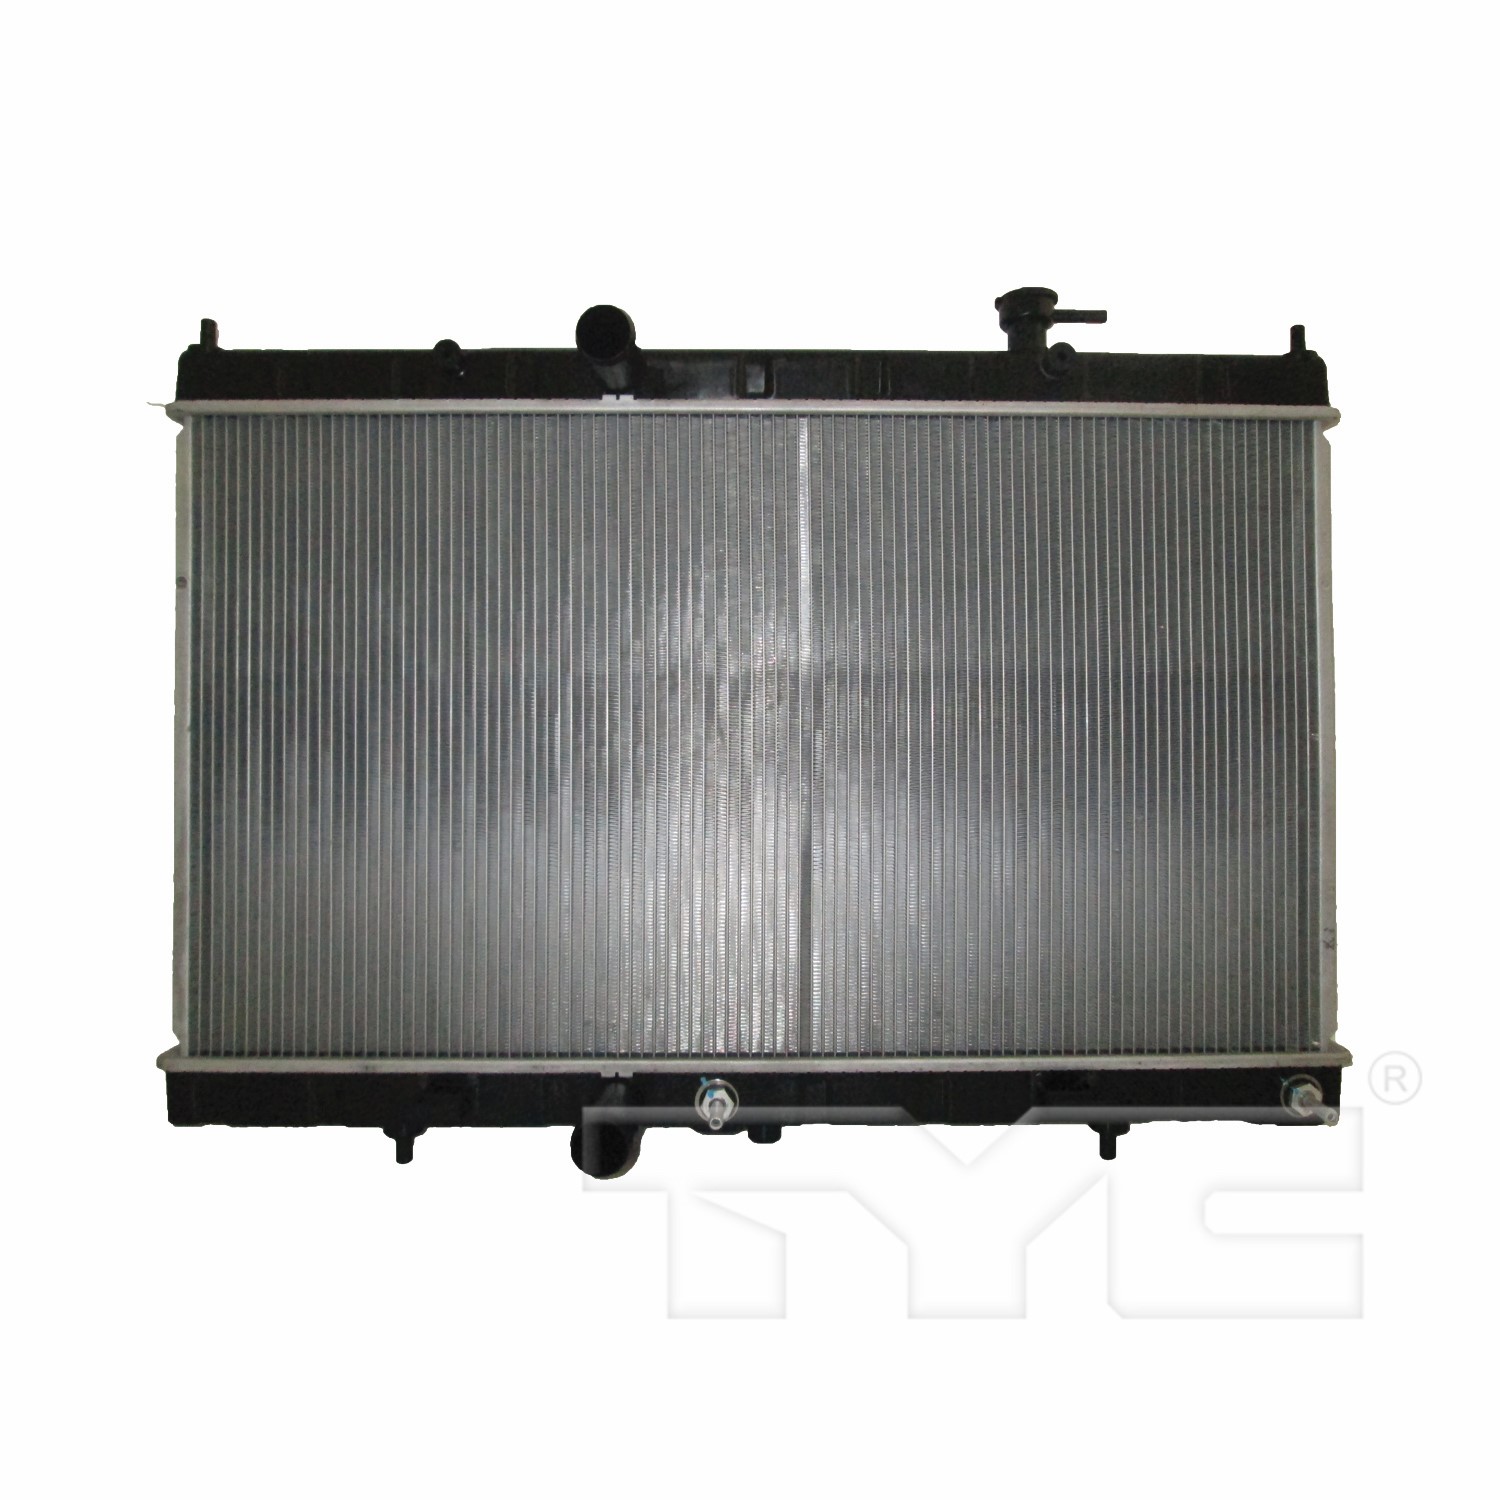 Aftermarket RADIATORS for NISSAN - ROGUE, ROGUE,14-20,Radiator assembly